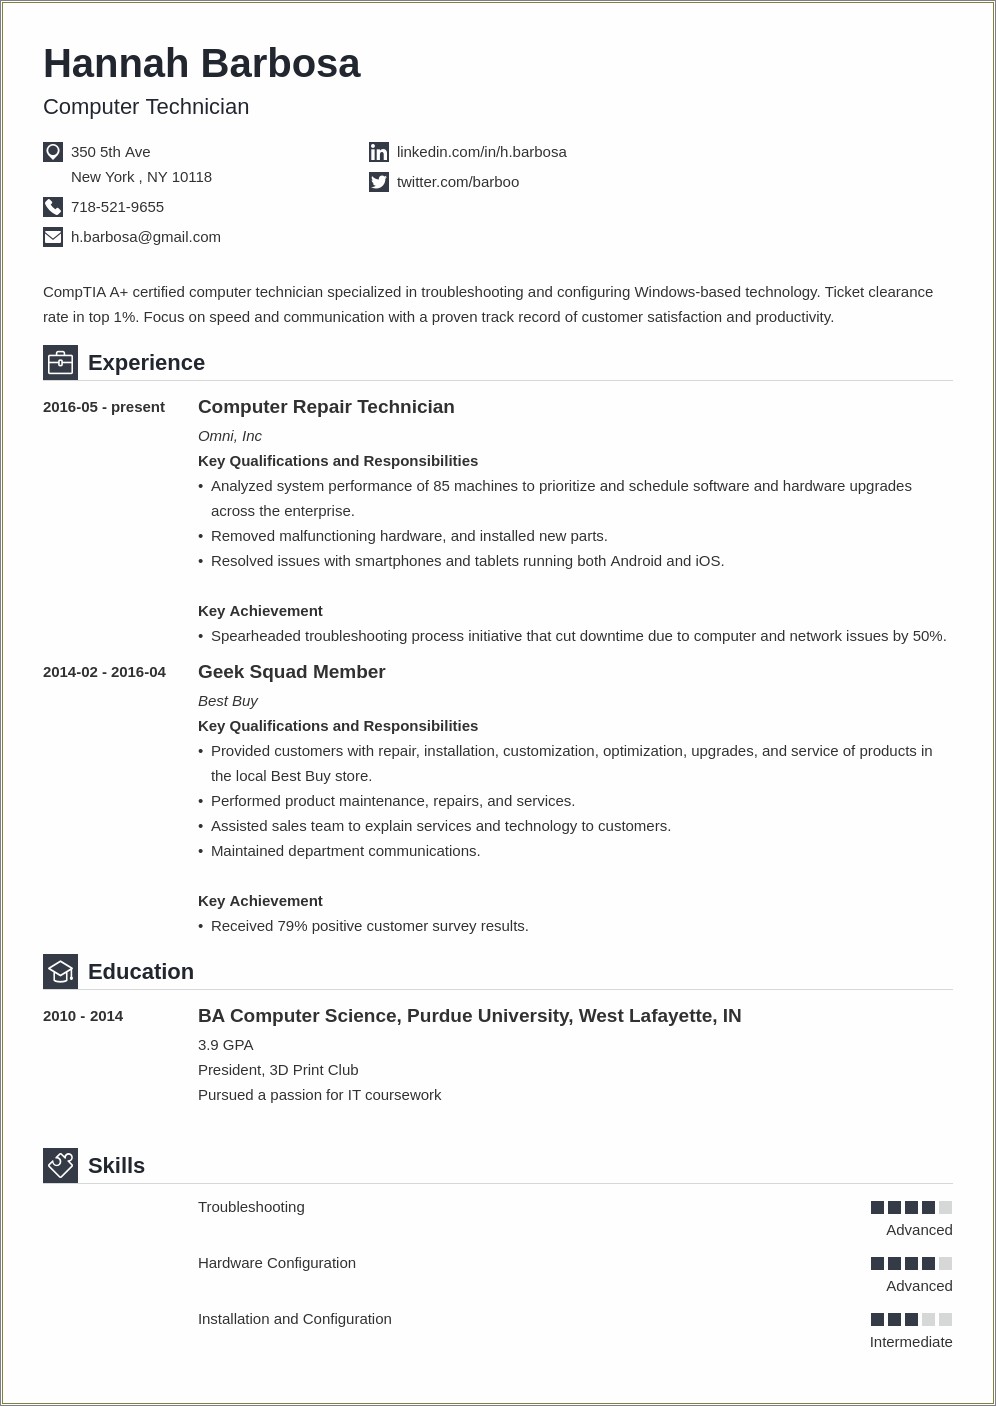 Resume Objectives For Computer Support Specialist